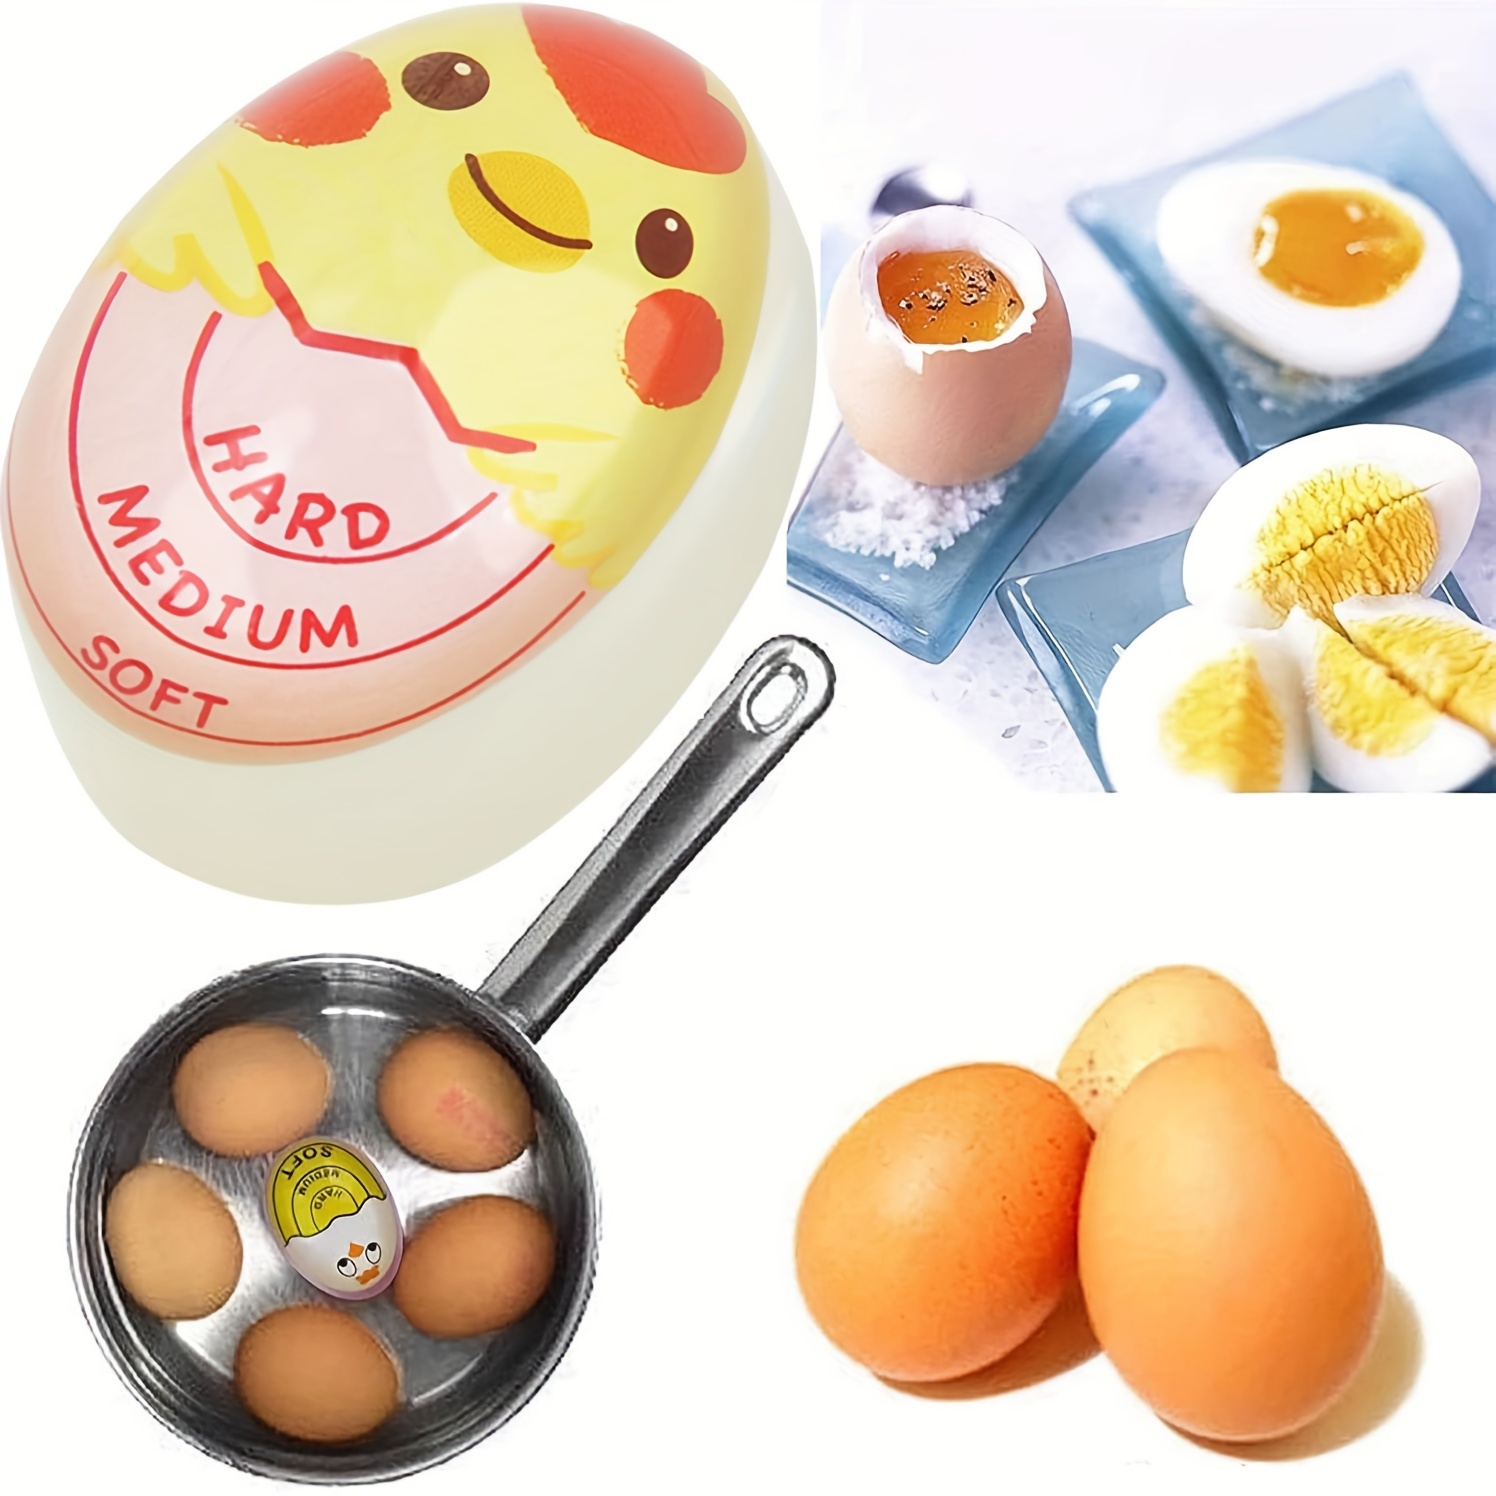 

1pc, Egg Timer, Egg Timer For Boiling Eggs, Cute Egg Timer, Carton Egg Timer, Kawaii Egg Timer, Creative Egg Timer, Reusable Egg Timer, Kitchen Egg Timer For Home, Kitchen Tools